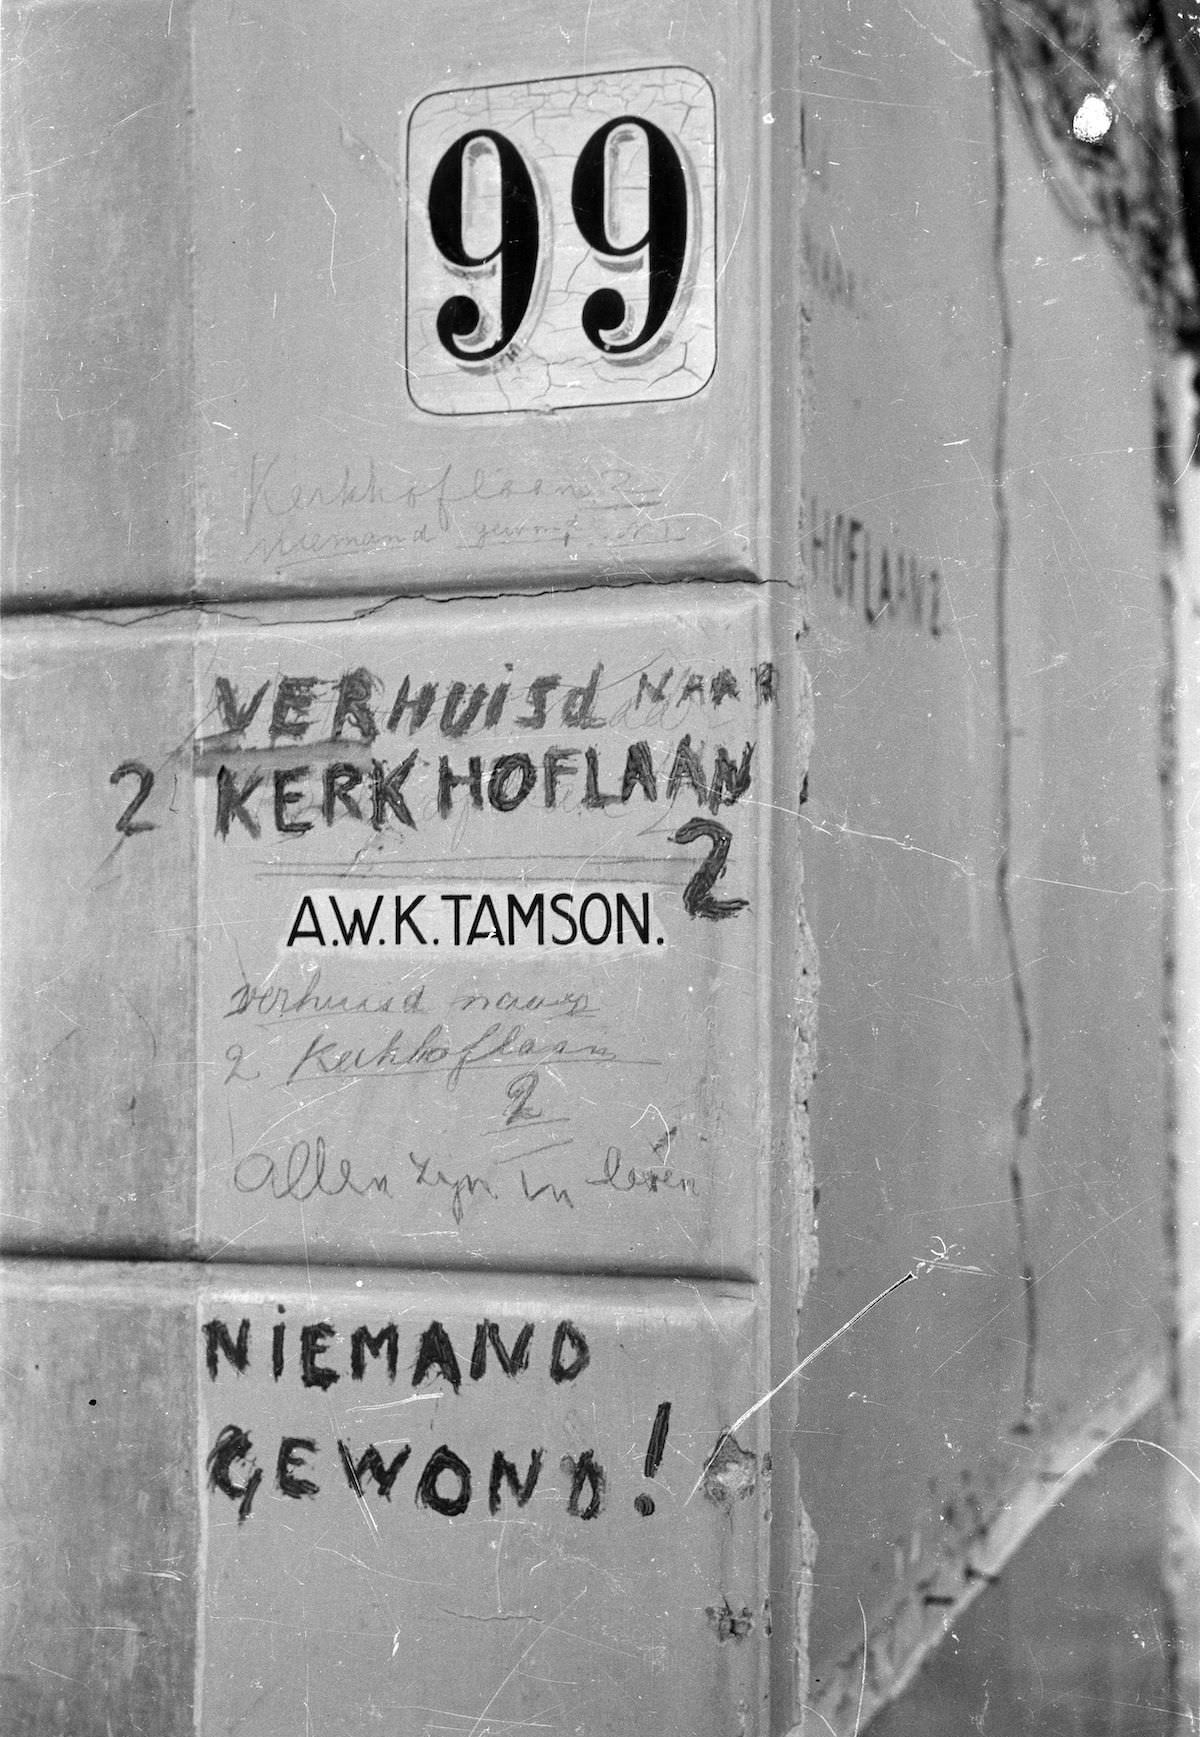 Inscription next to the front door of the house at 99 Riouwstraat in The Hague after a V2 impact on January 25, 1945. The residents, Family A.